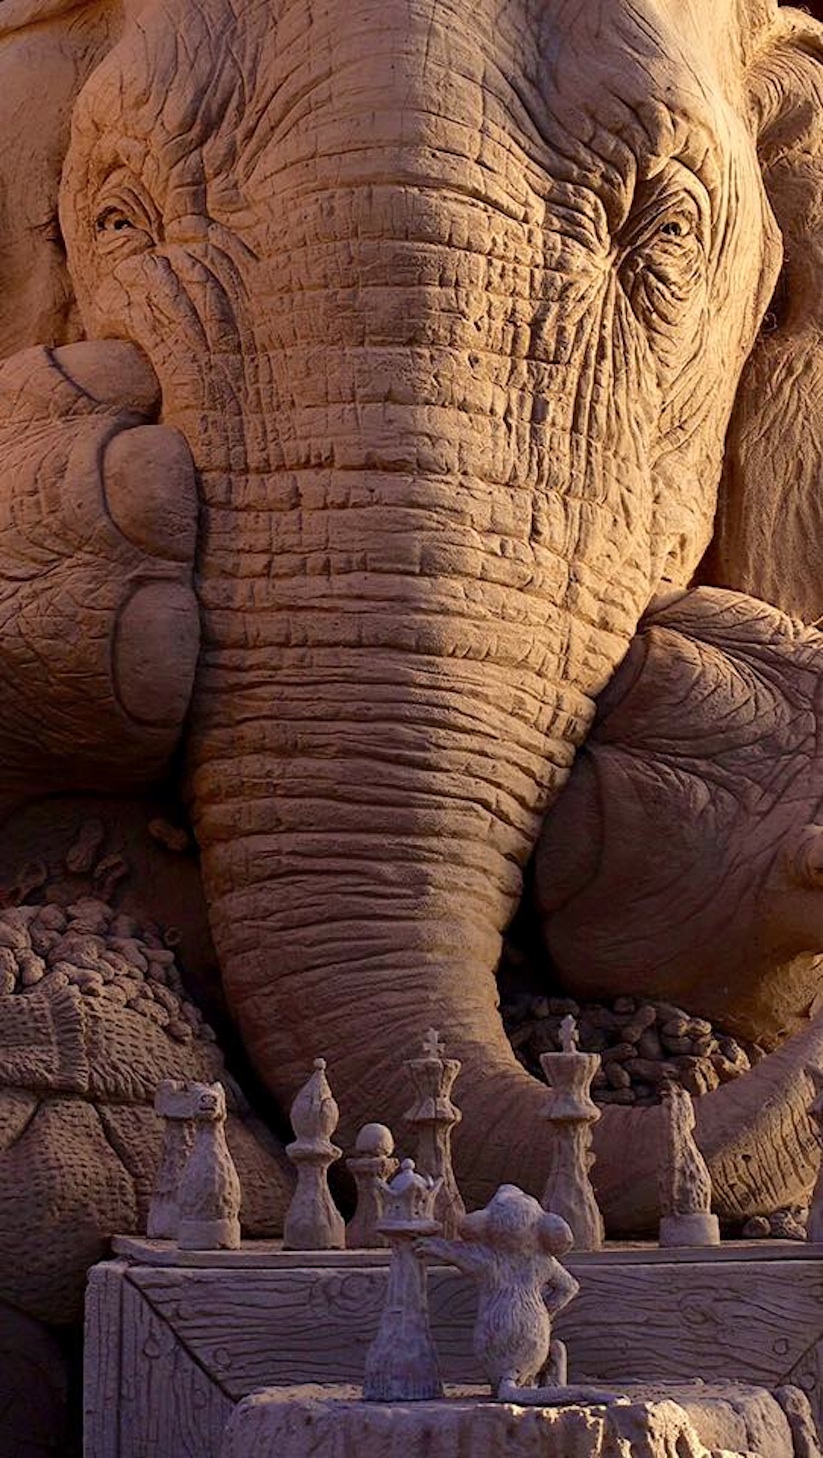 Impressive_Sand_Sculpture_Of_A_Life_Size_Elephant_Playing_Chess_With_A_Mouse_2016_09